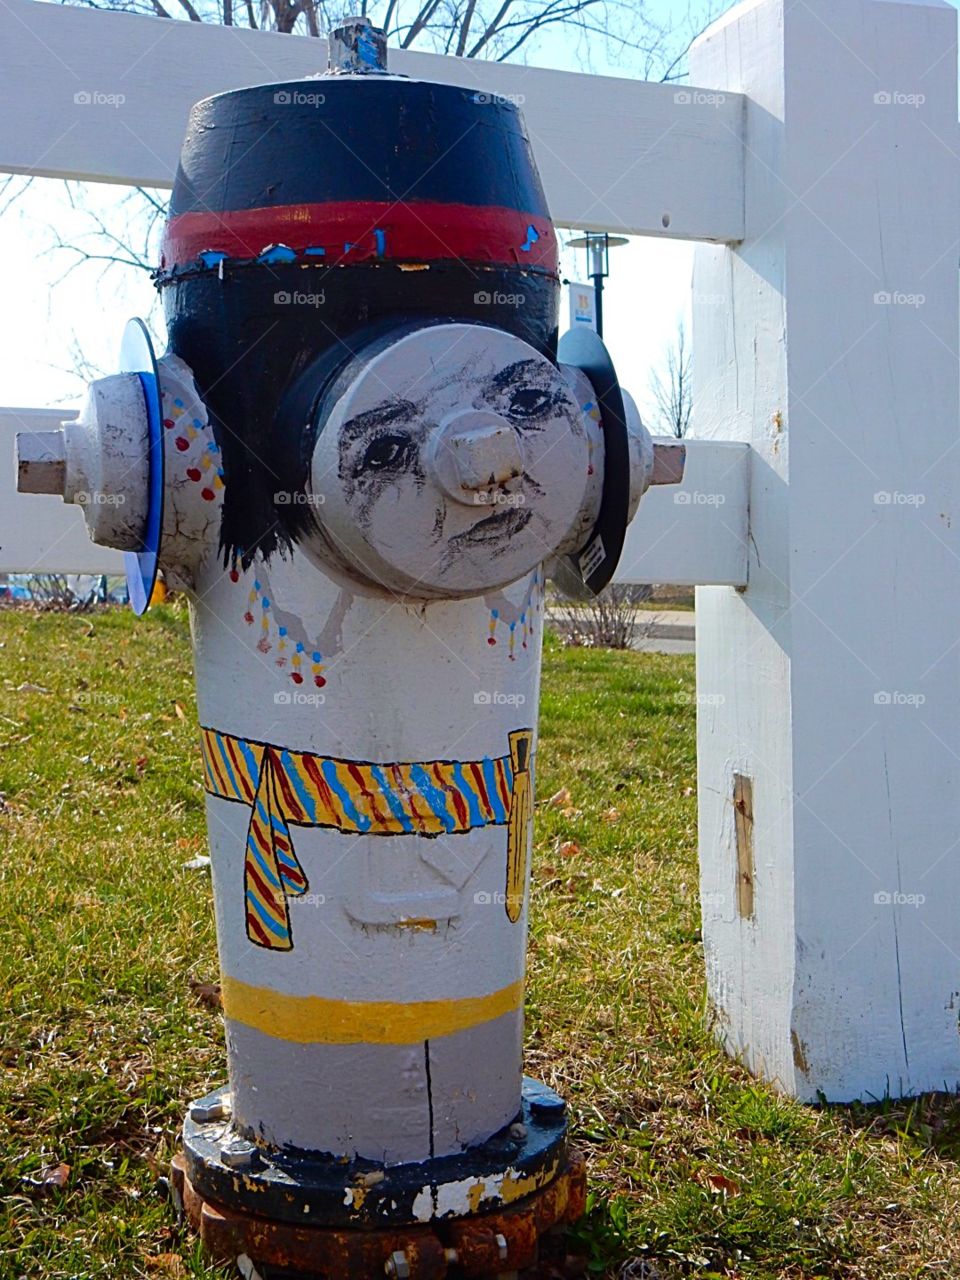 Fire hydrant character